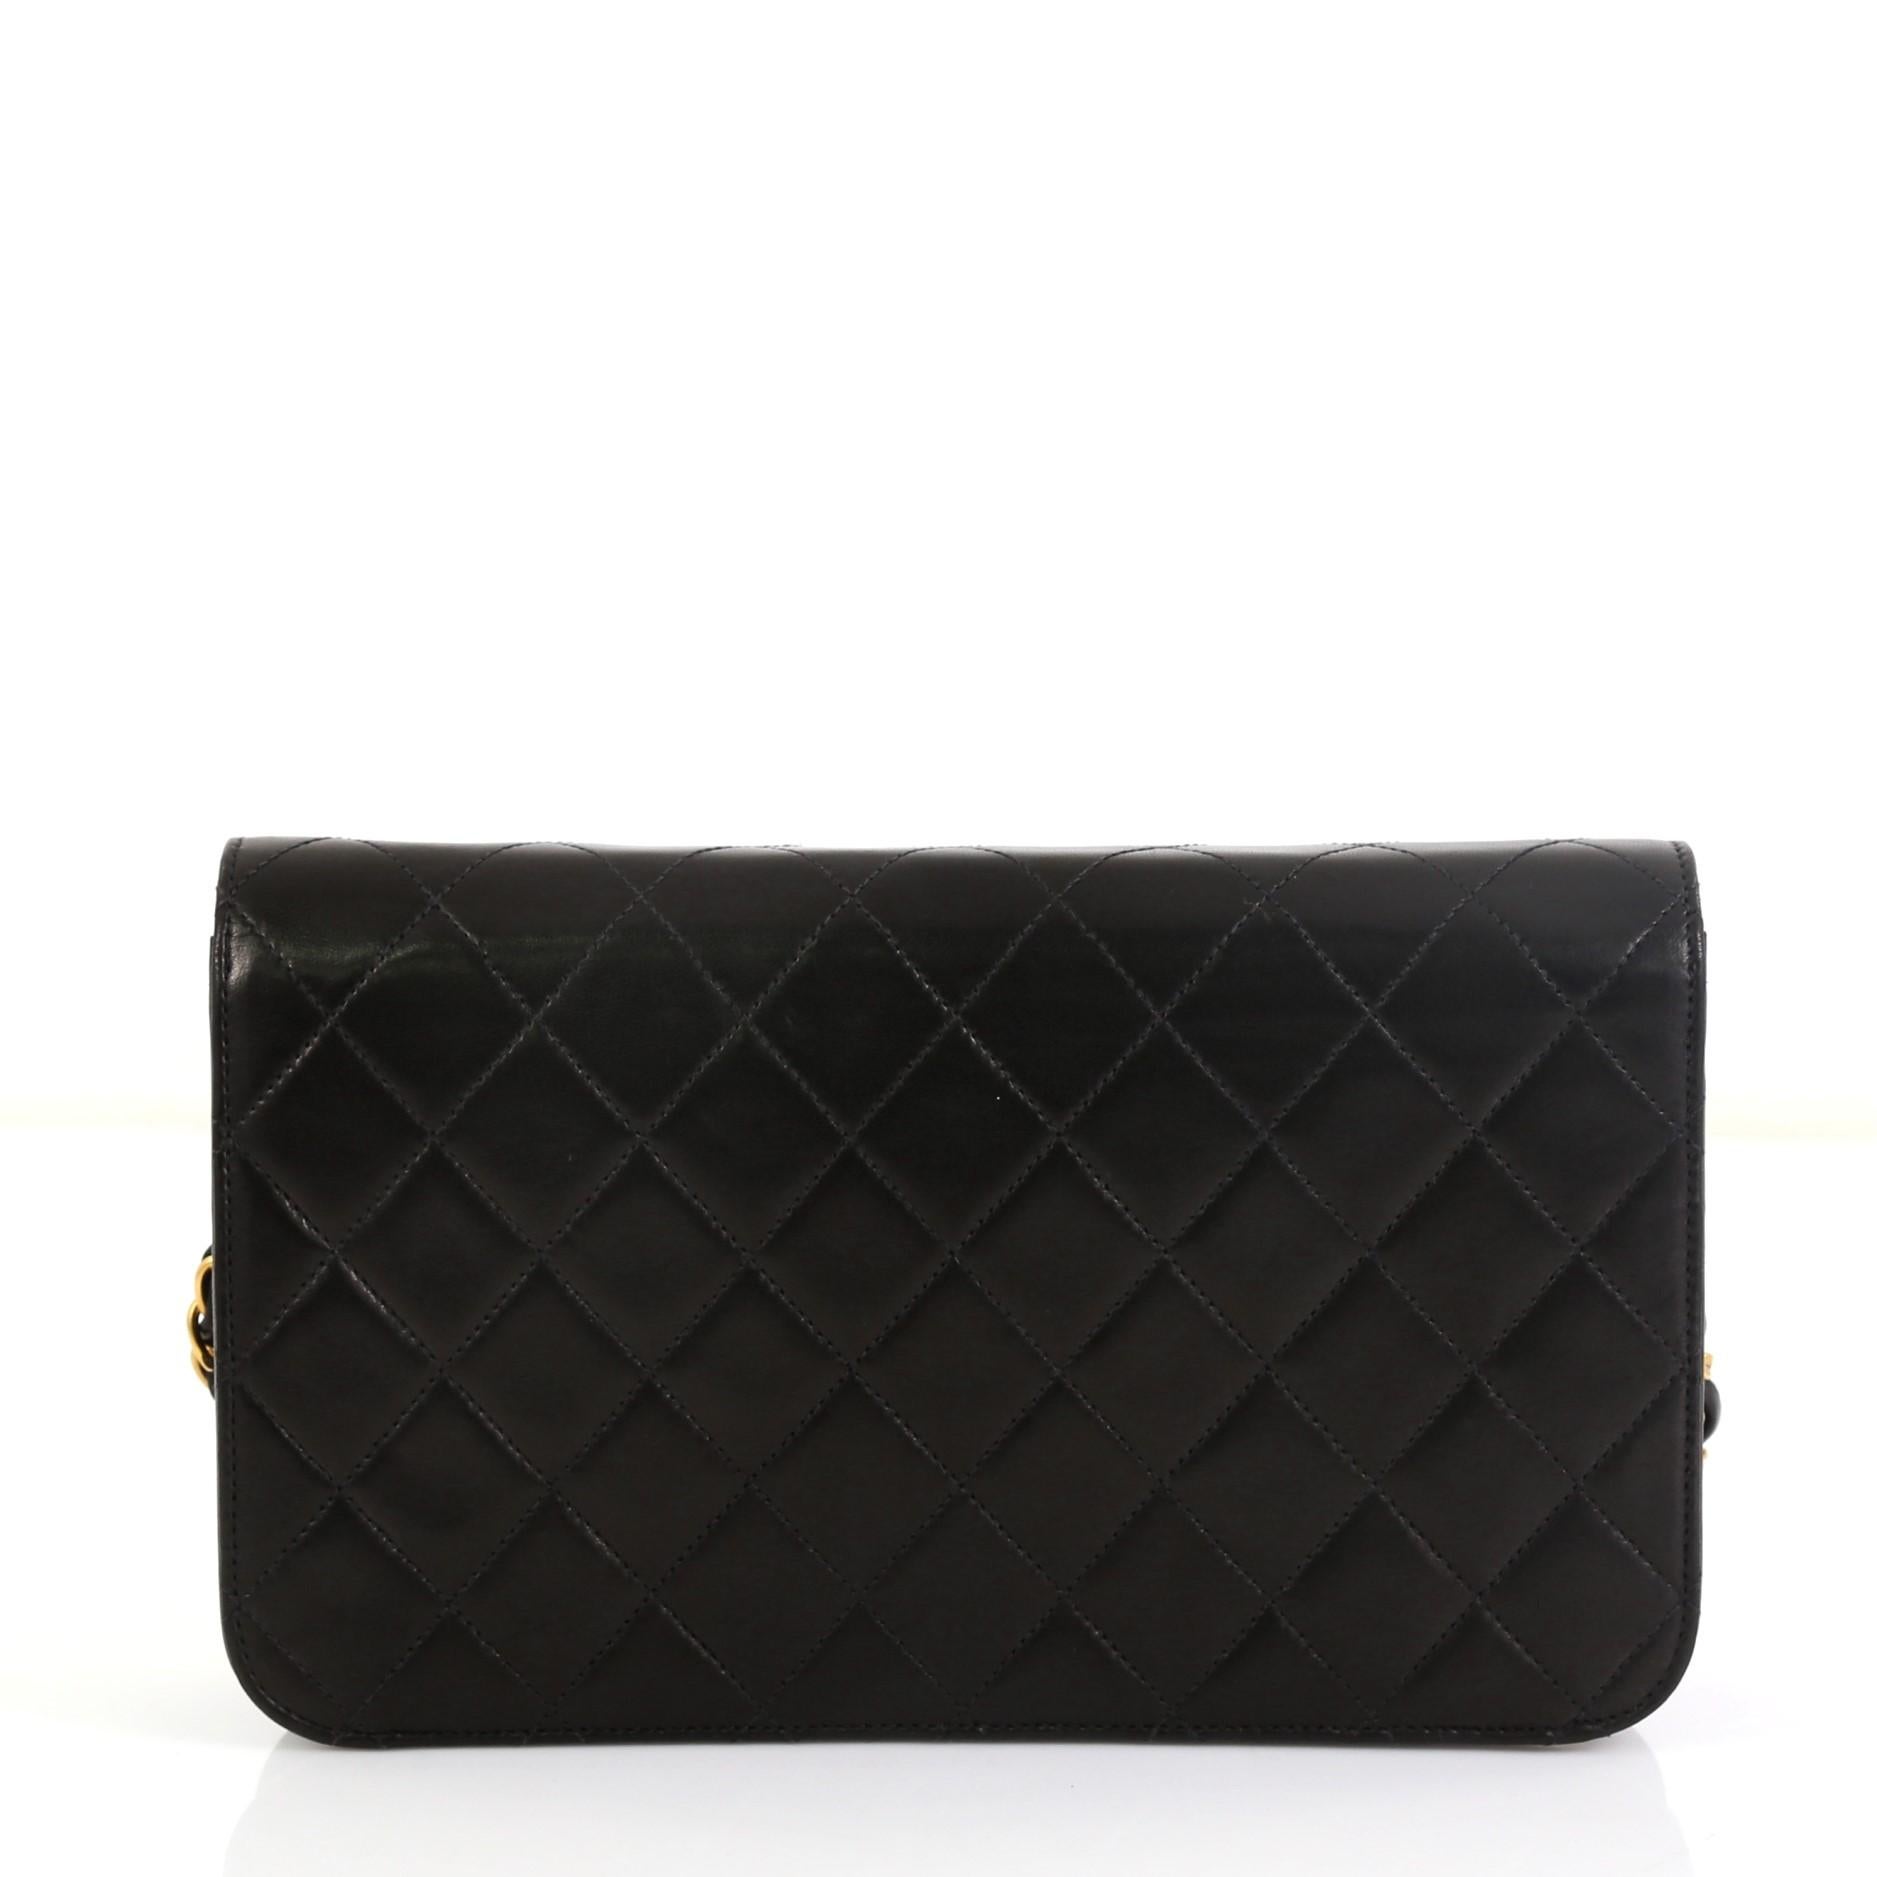 Black Chanel Vintage 3 Way Full Flap Bag Quilted Lambskin Small 